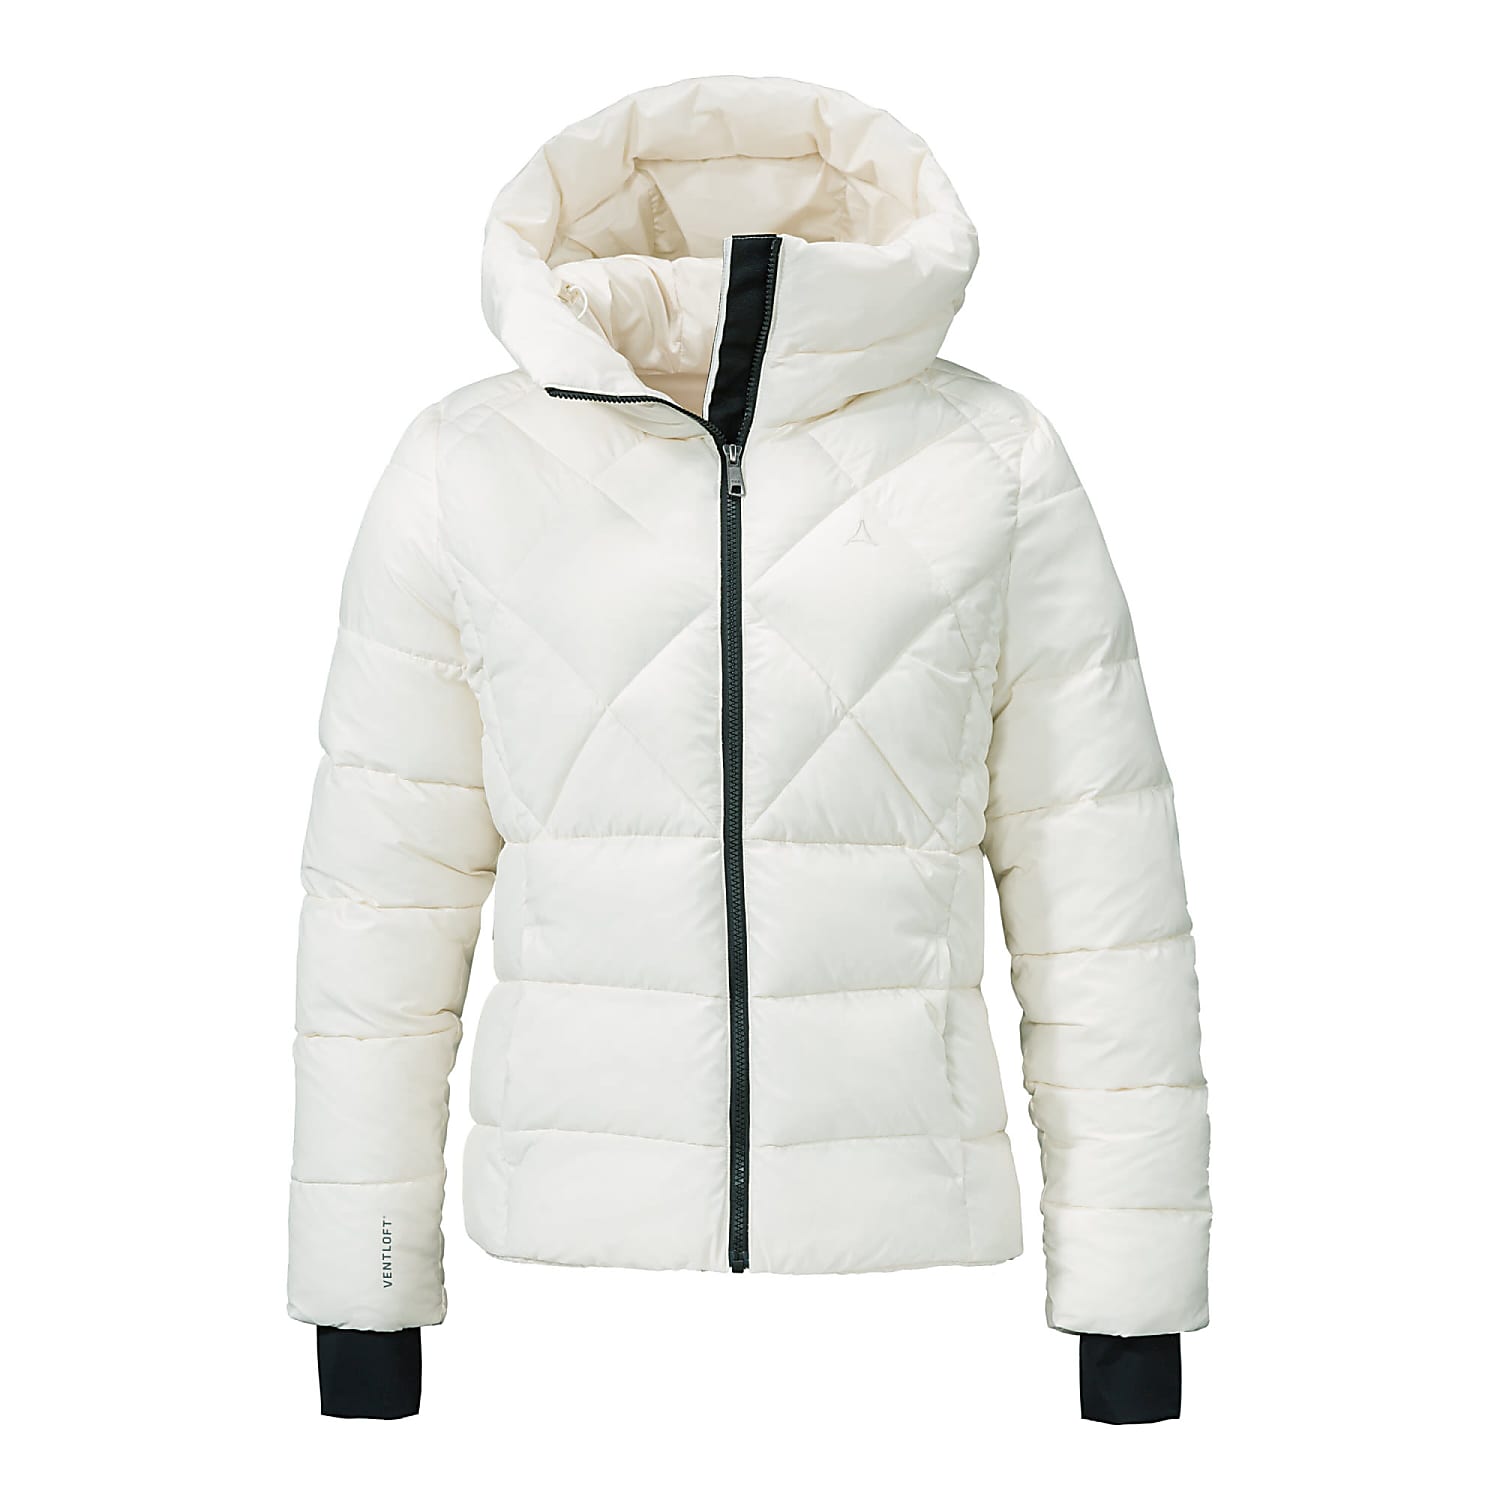 cheap and INSULATED shipping - BOSTON, W White Fast Schoeffel Whisper JACKET